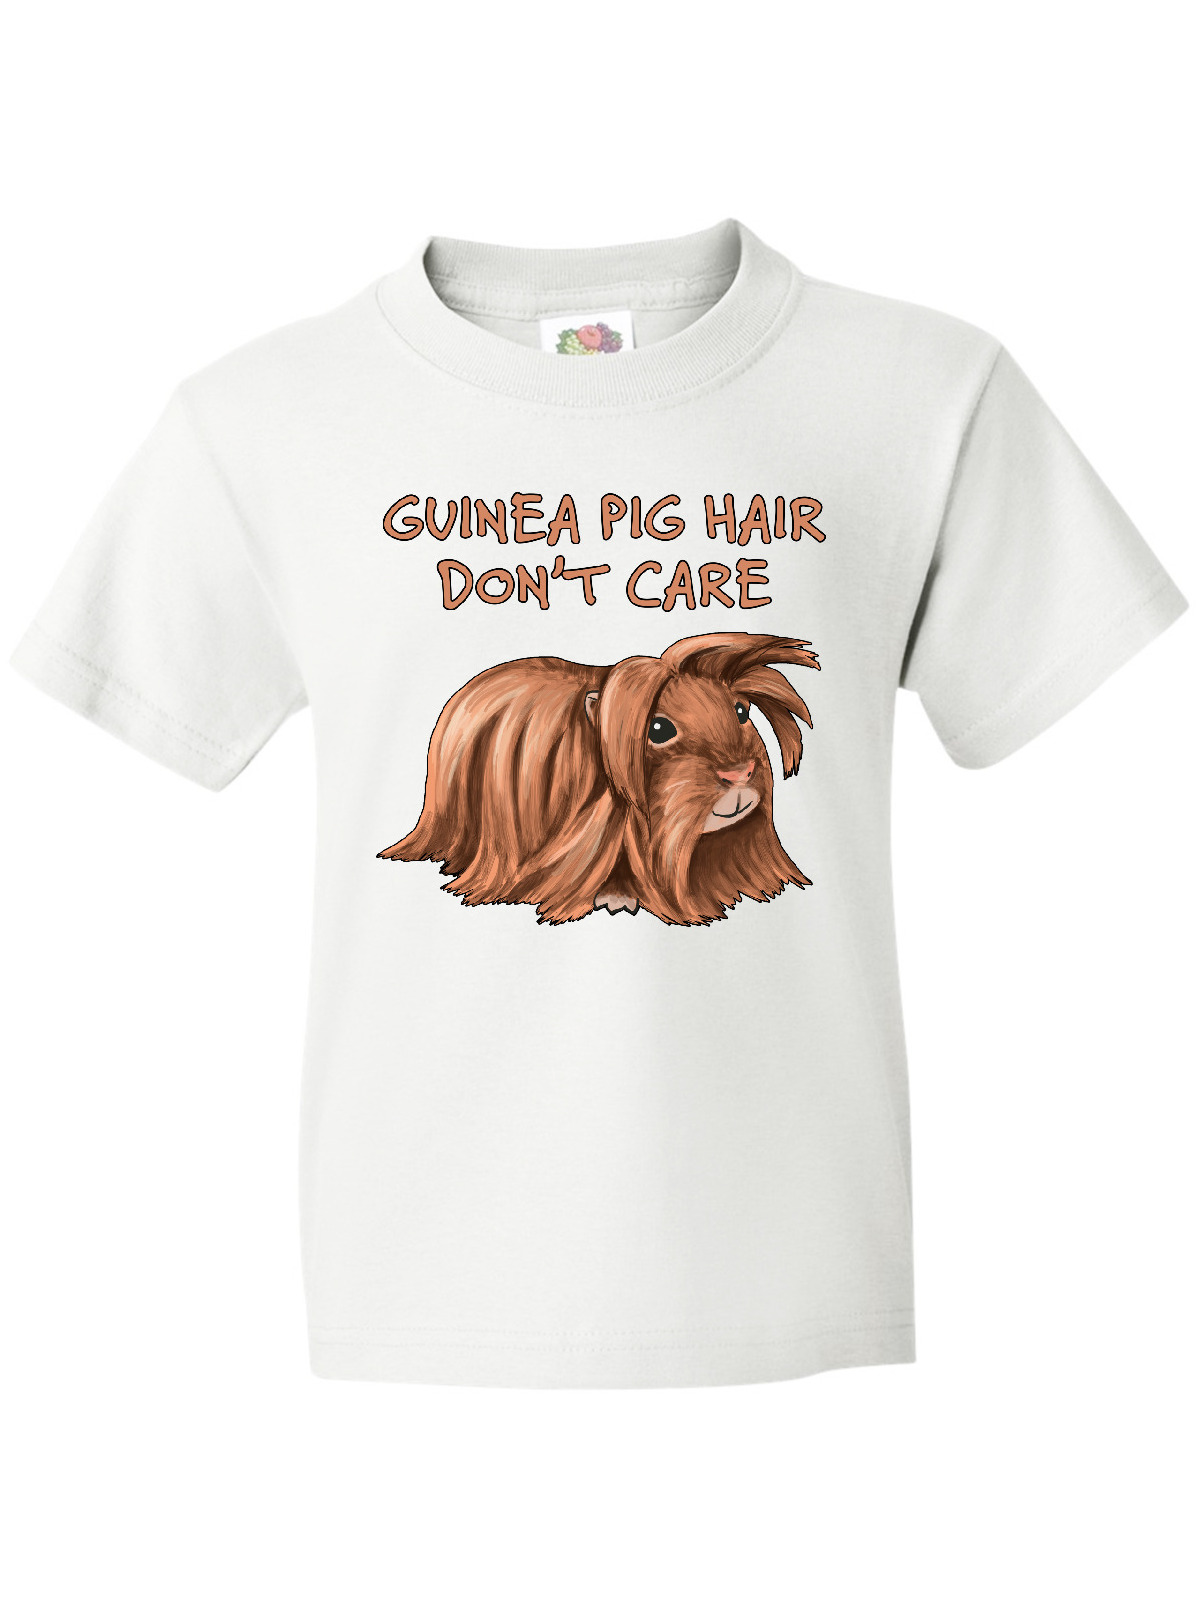 Inktastic Guinea Pig Hair Don't Care Youth T-Shirt - image 1 of 4